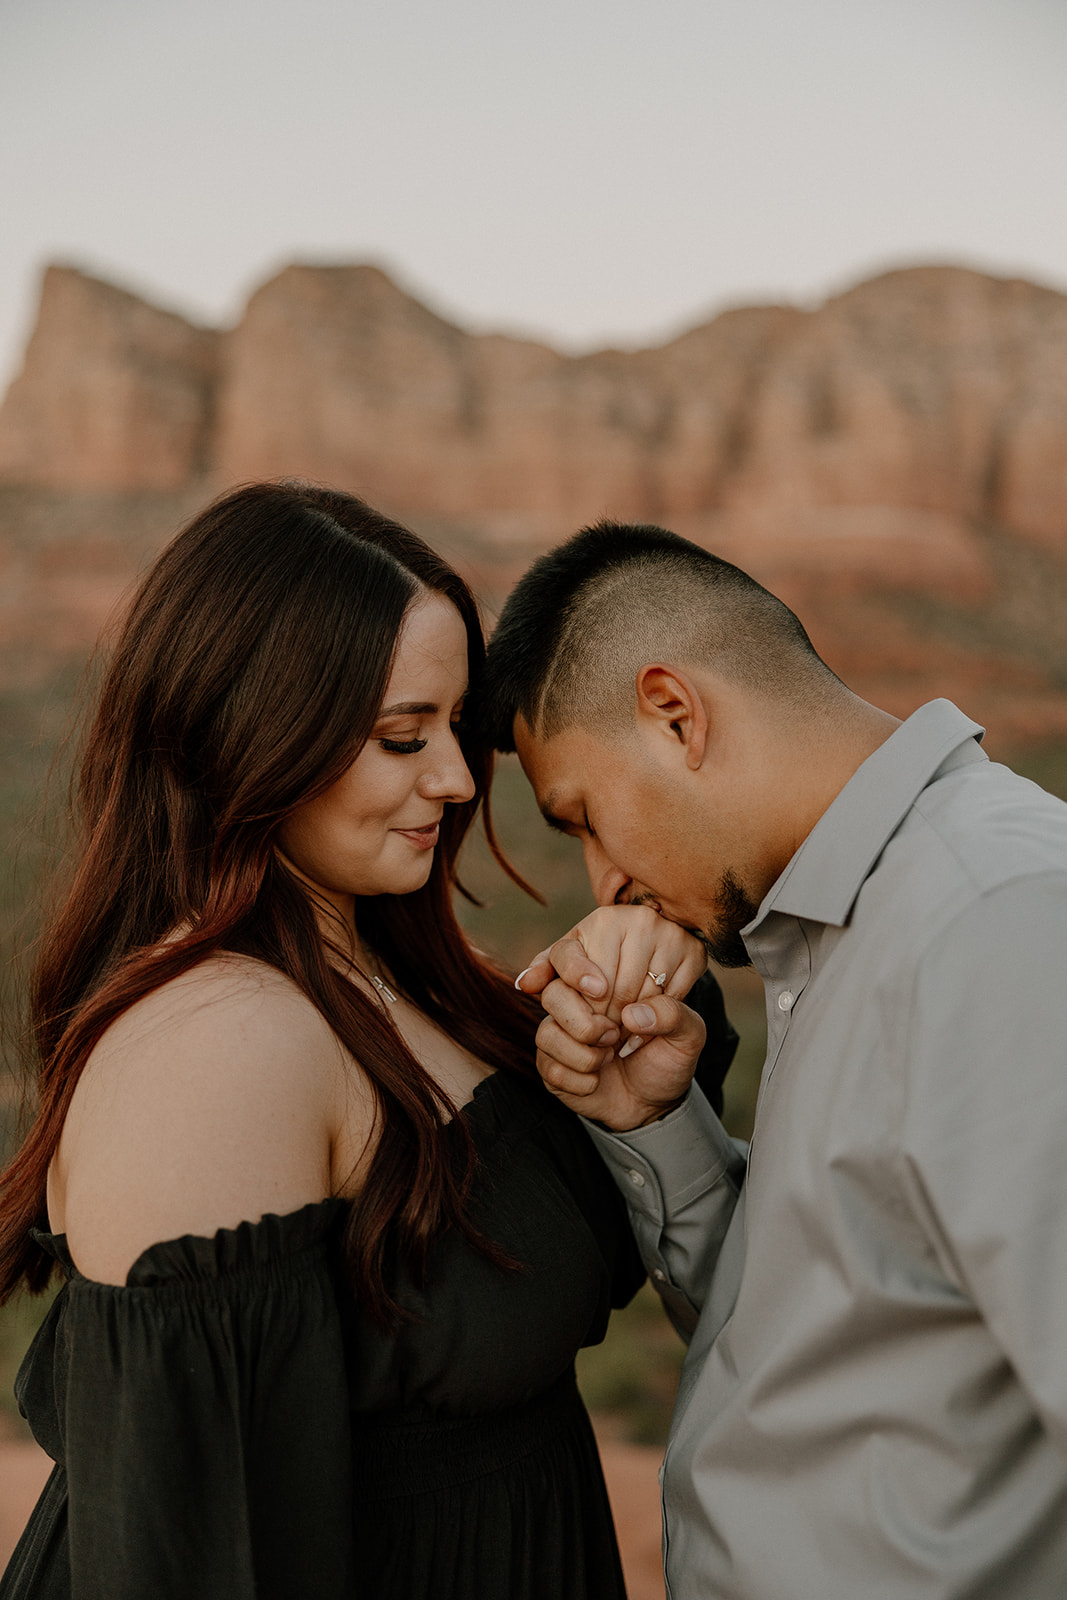 Beautiful couple shares a romantic moment during their dreamy Arizona engagement photoshoot in nature!